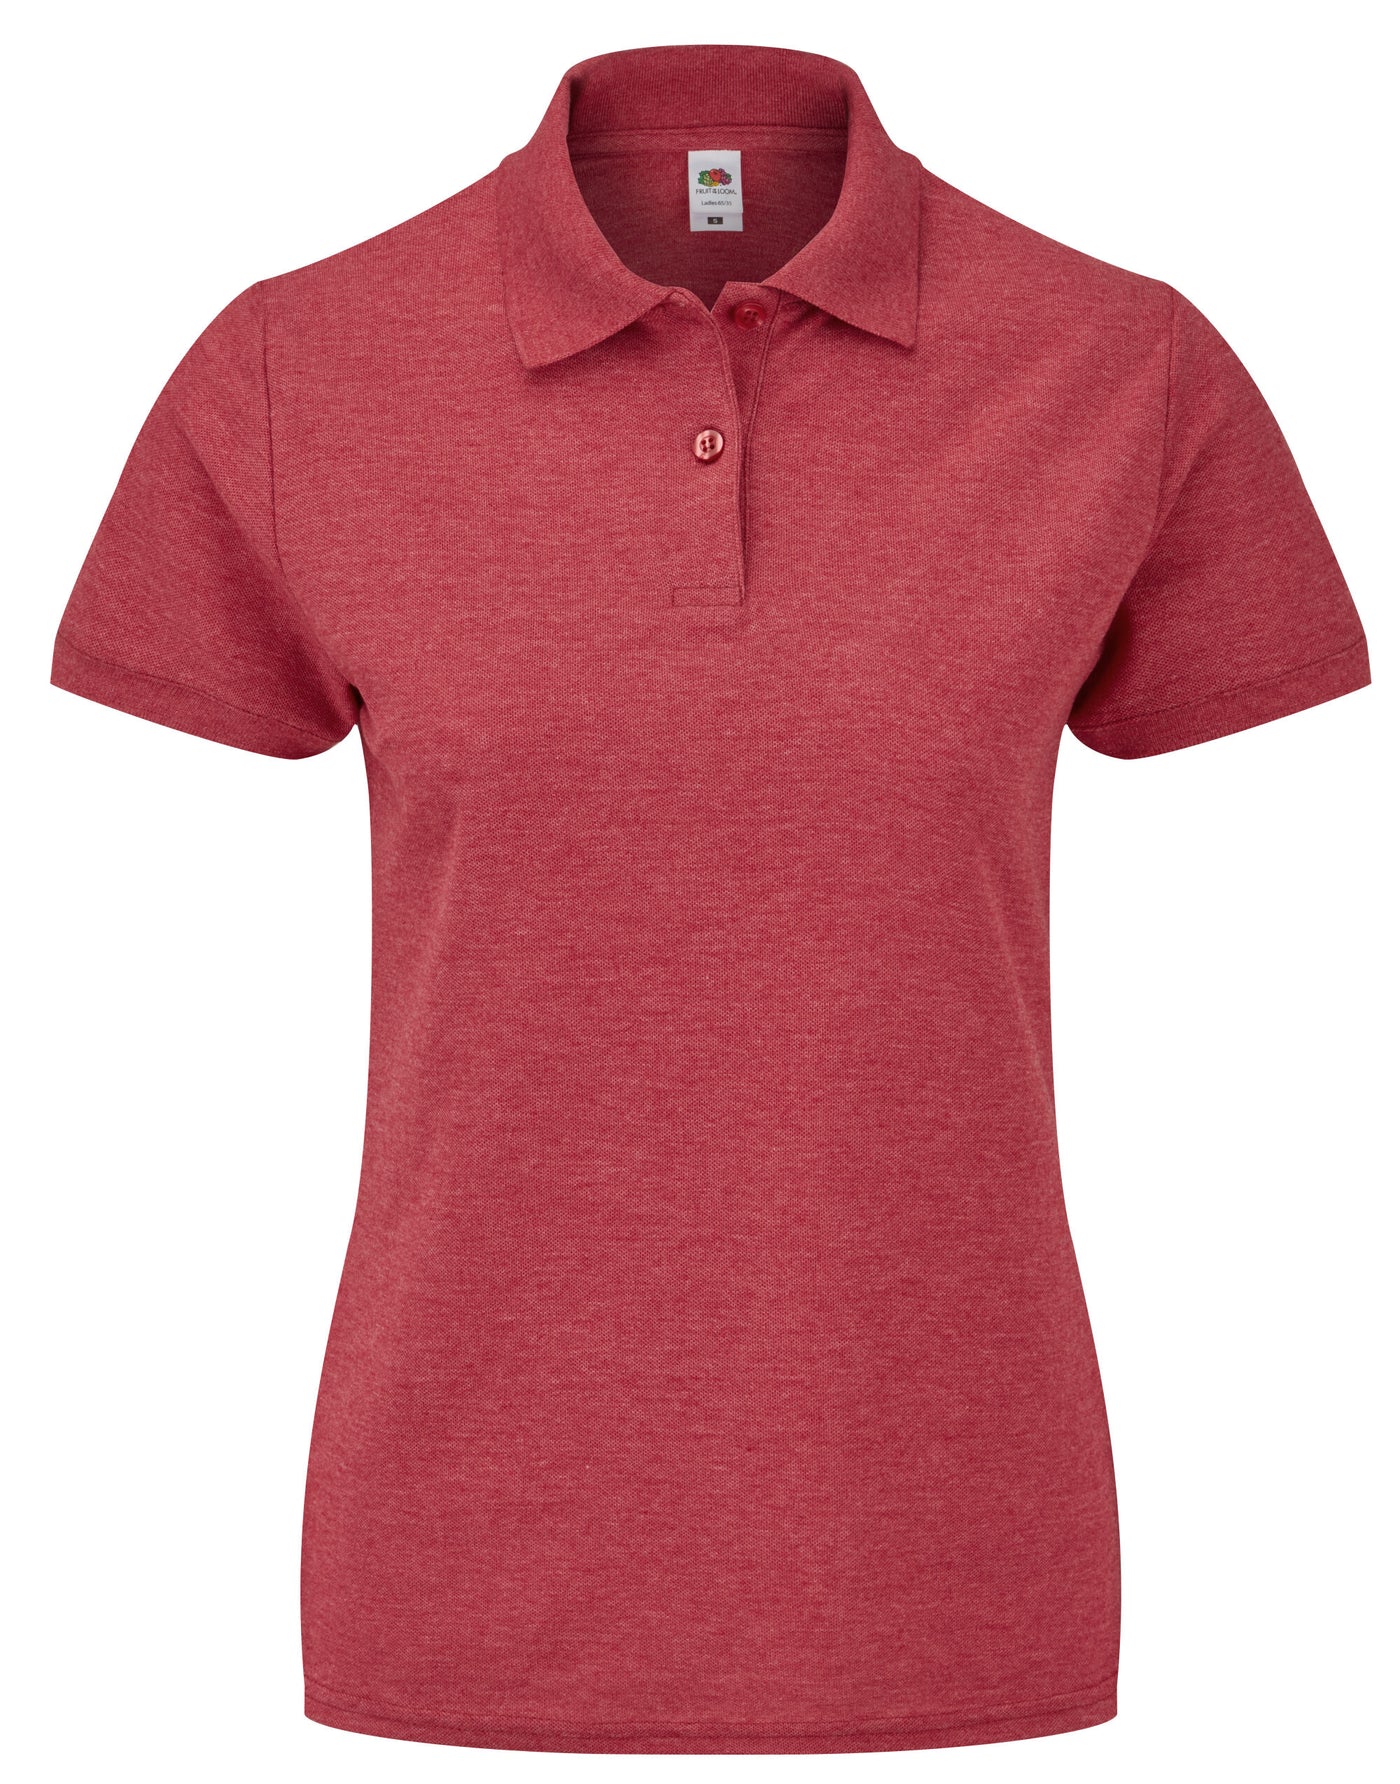 Ladies Fit Polo Shirt In Heather Red